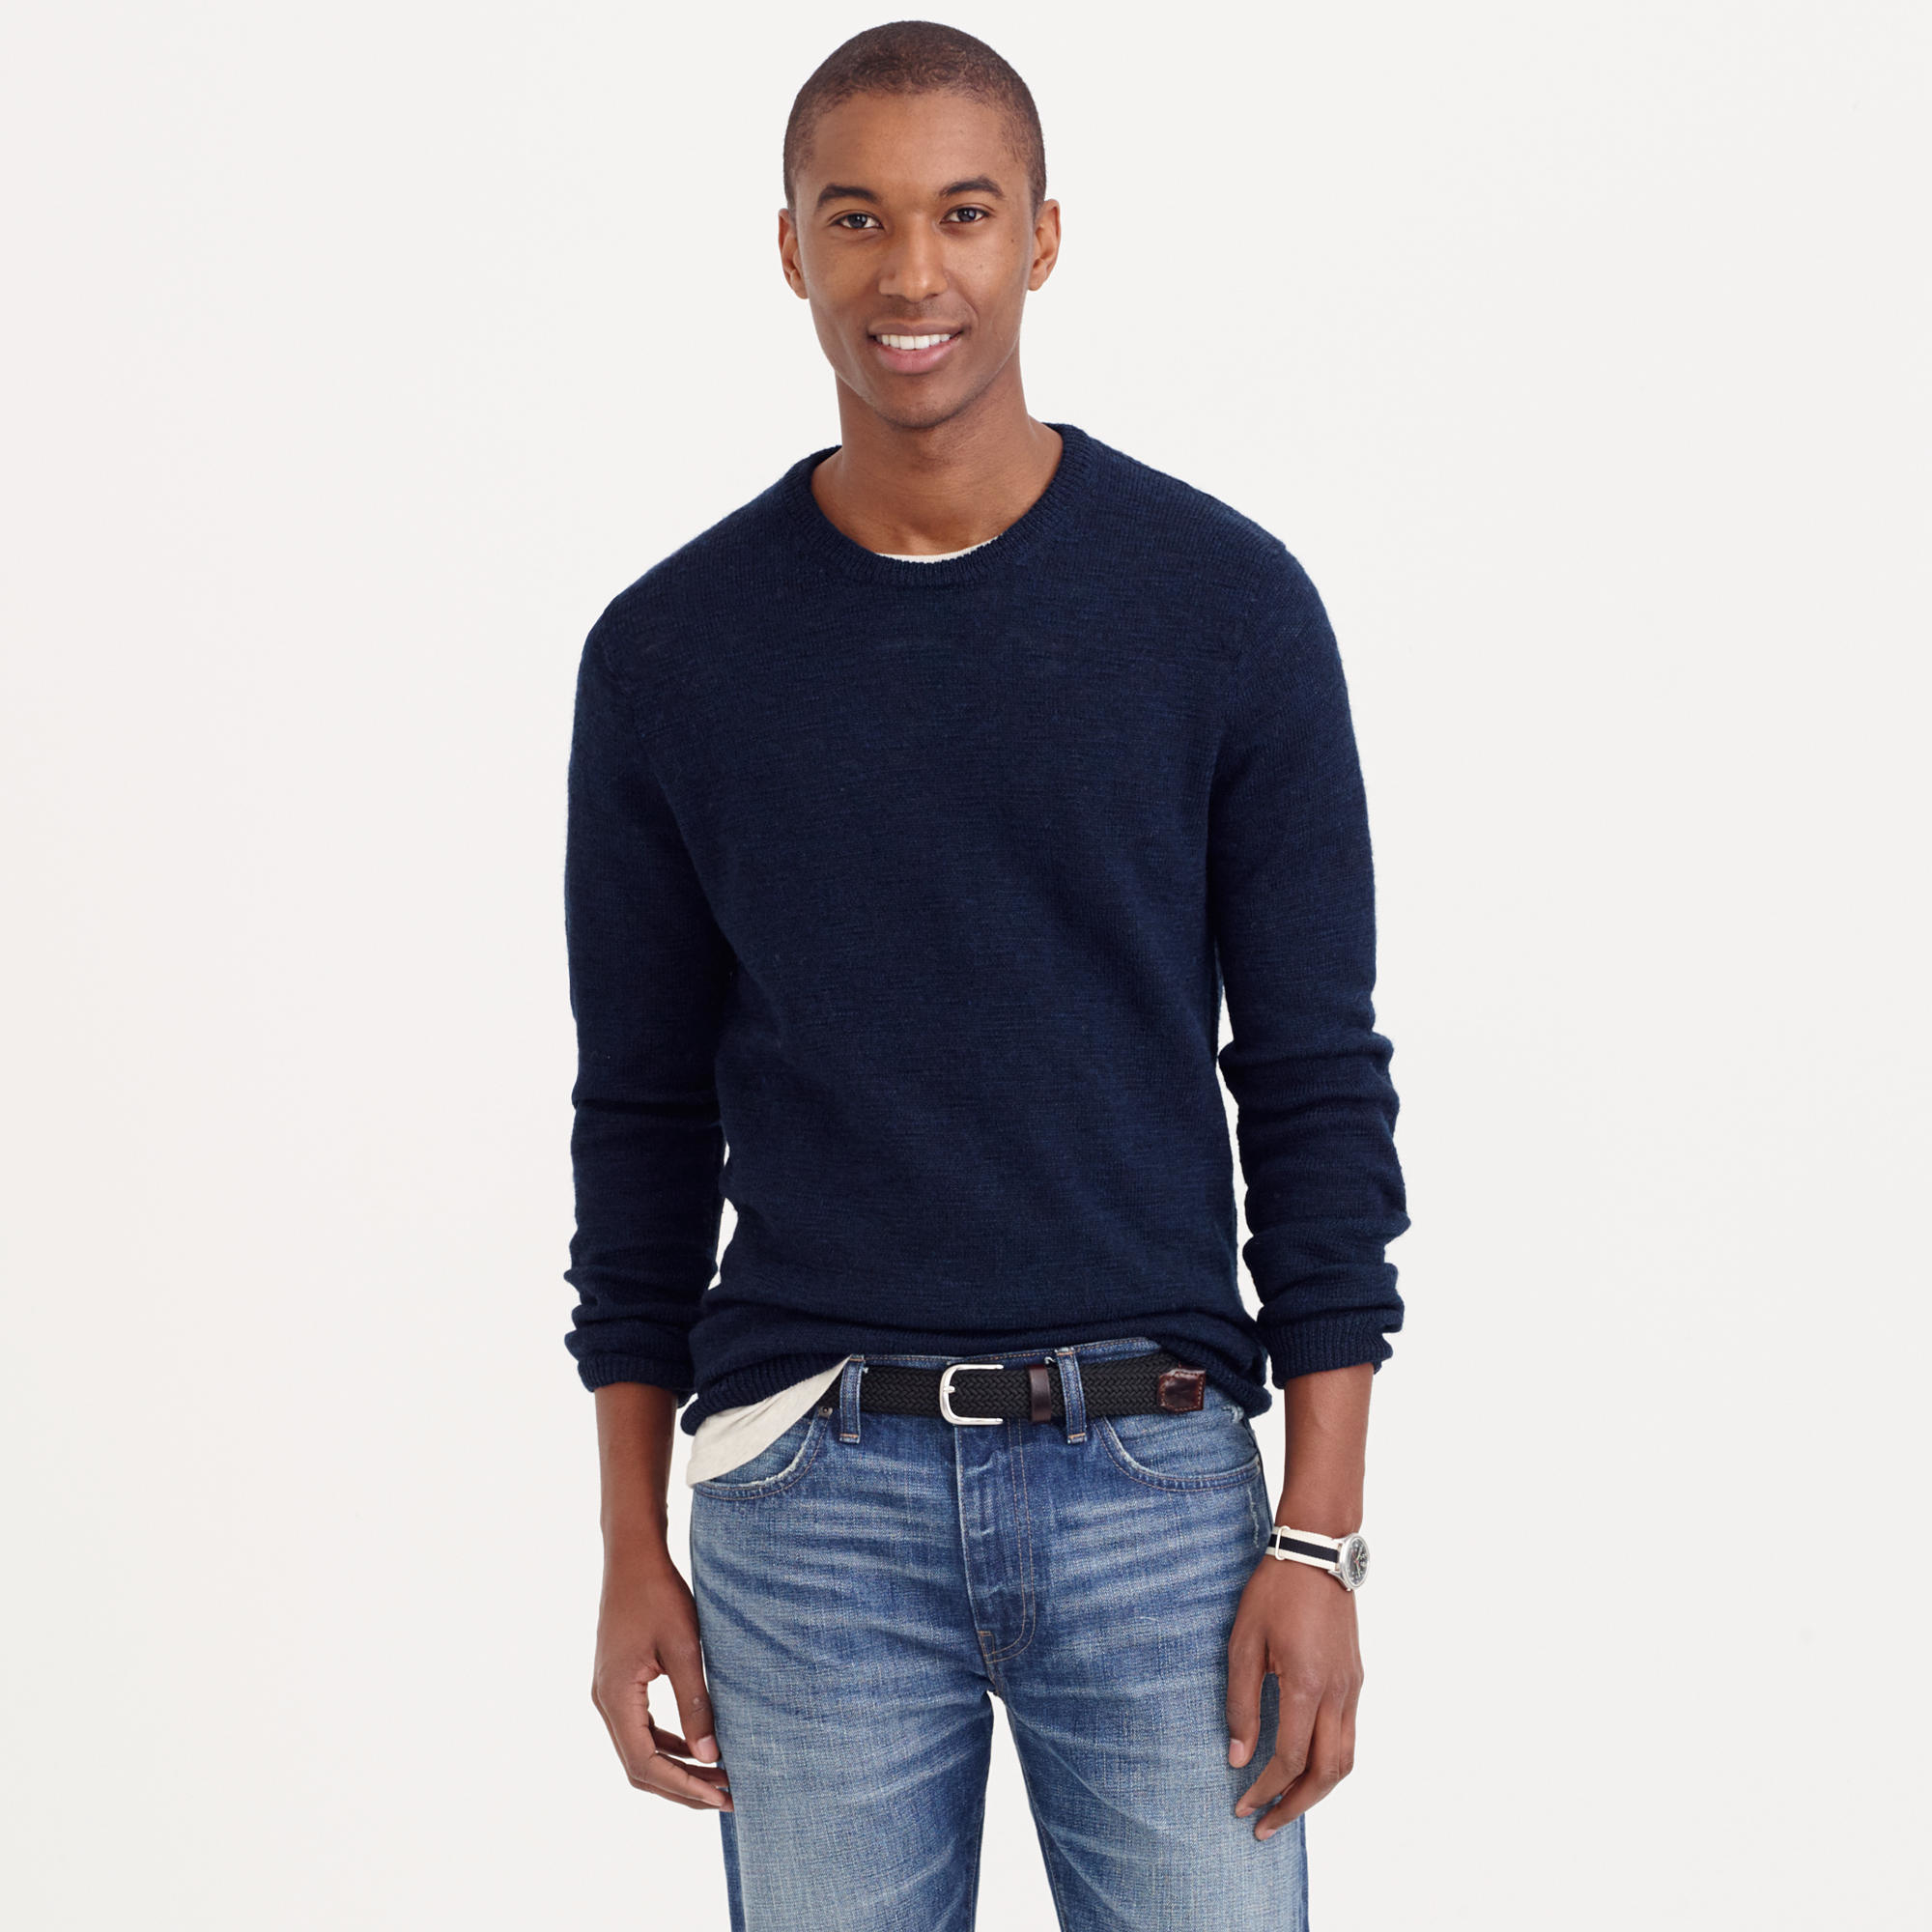 J.Crew Tall Rustic Merino V-neck Elbow-patch Sweater in Blue for Men